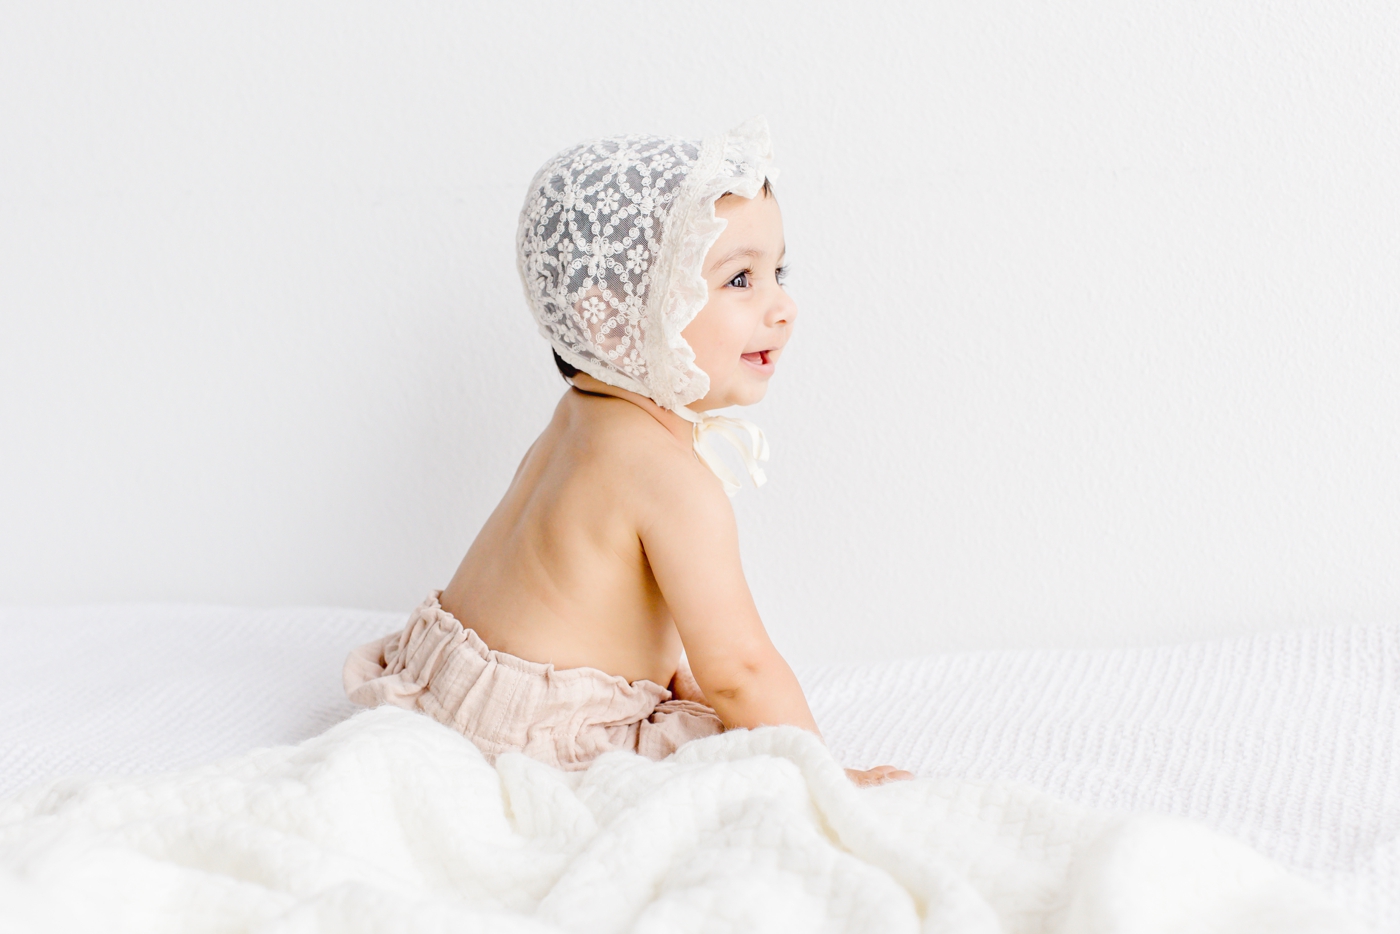 Baby girl in white lace bonnet smiling during studio session. Photo by Sana Ahmed Photography.